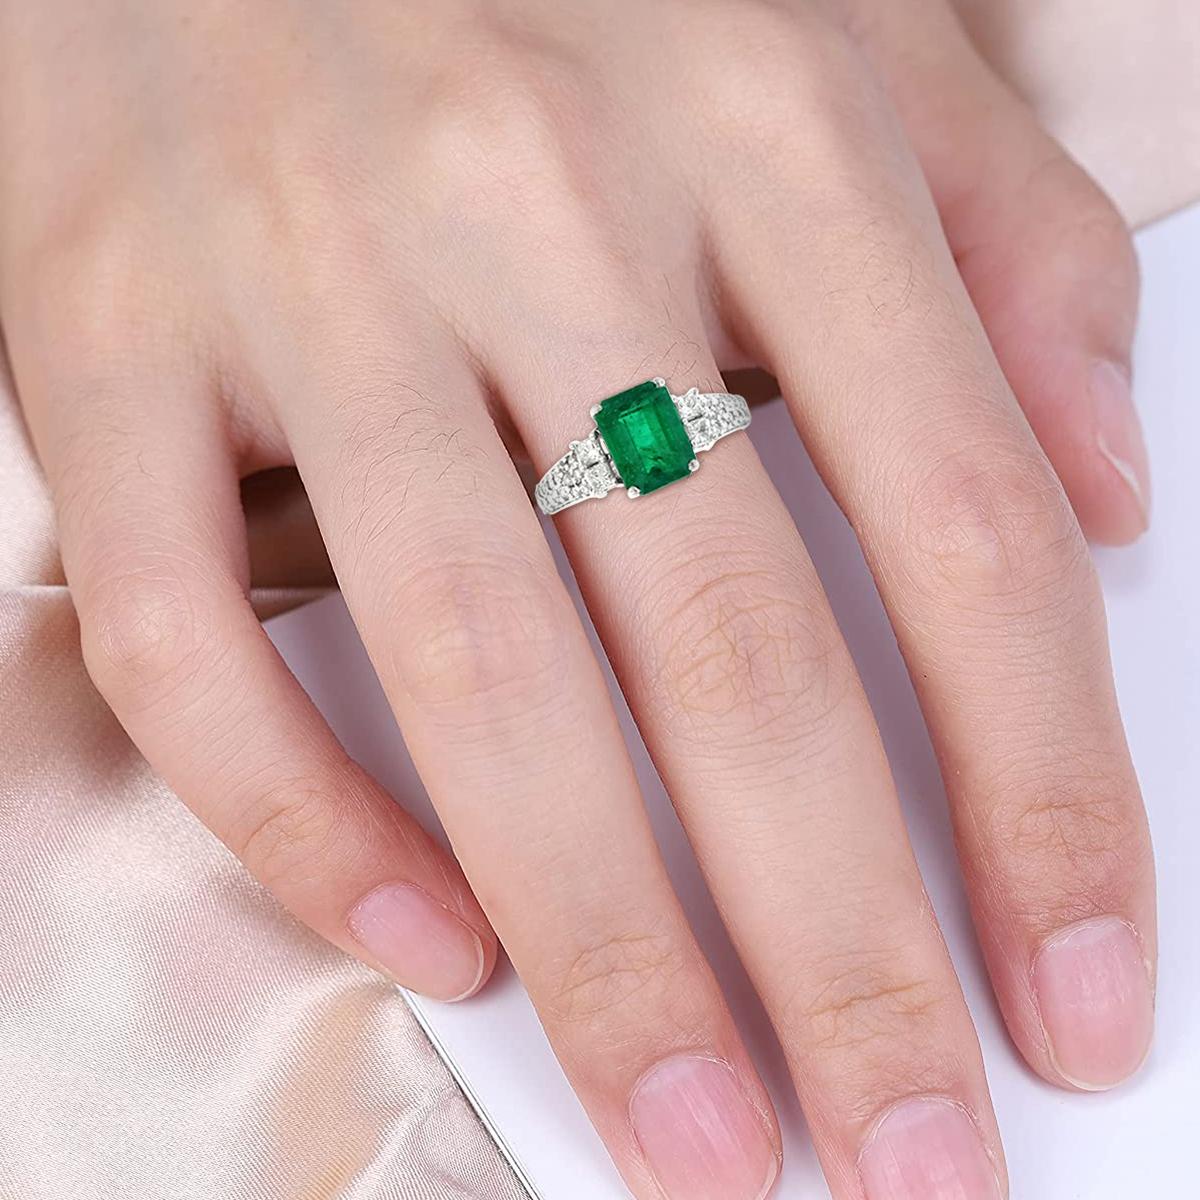 Modern 14K White Gold 1.62cts Emerald and Diamond Ring, Style# R3057